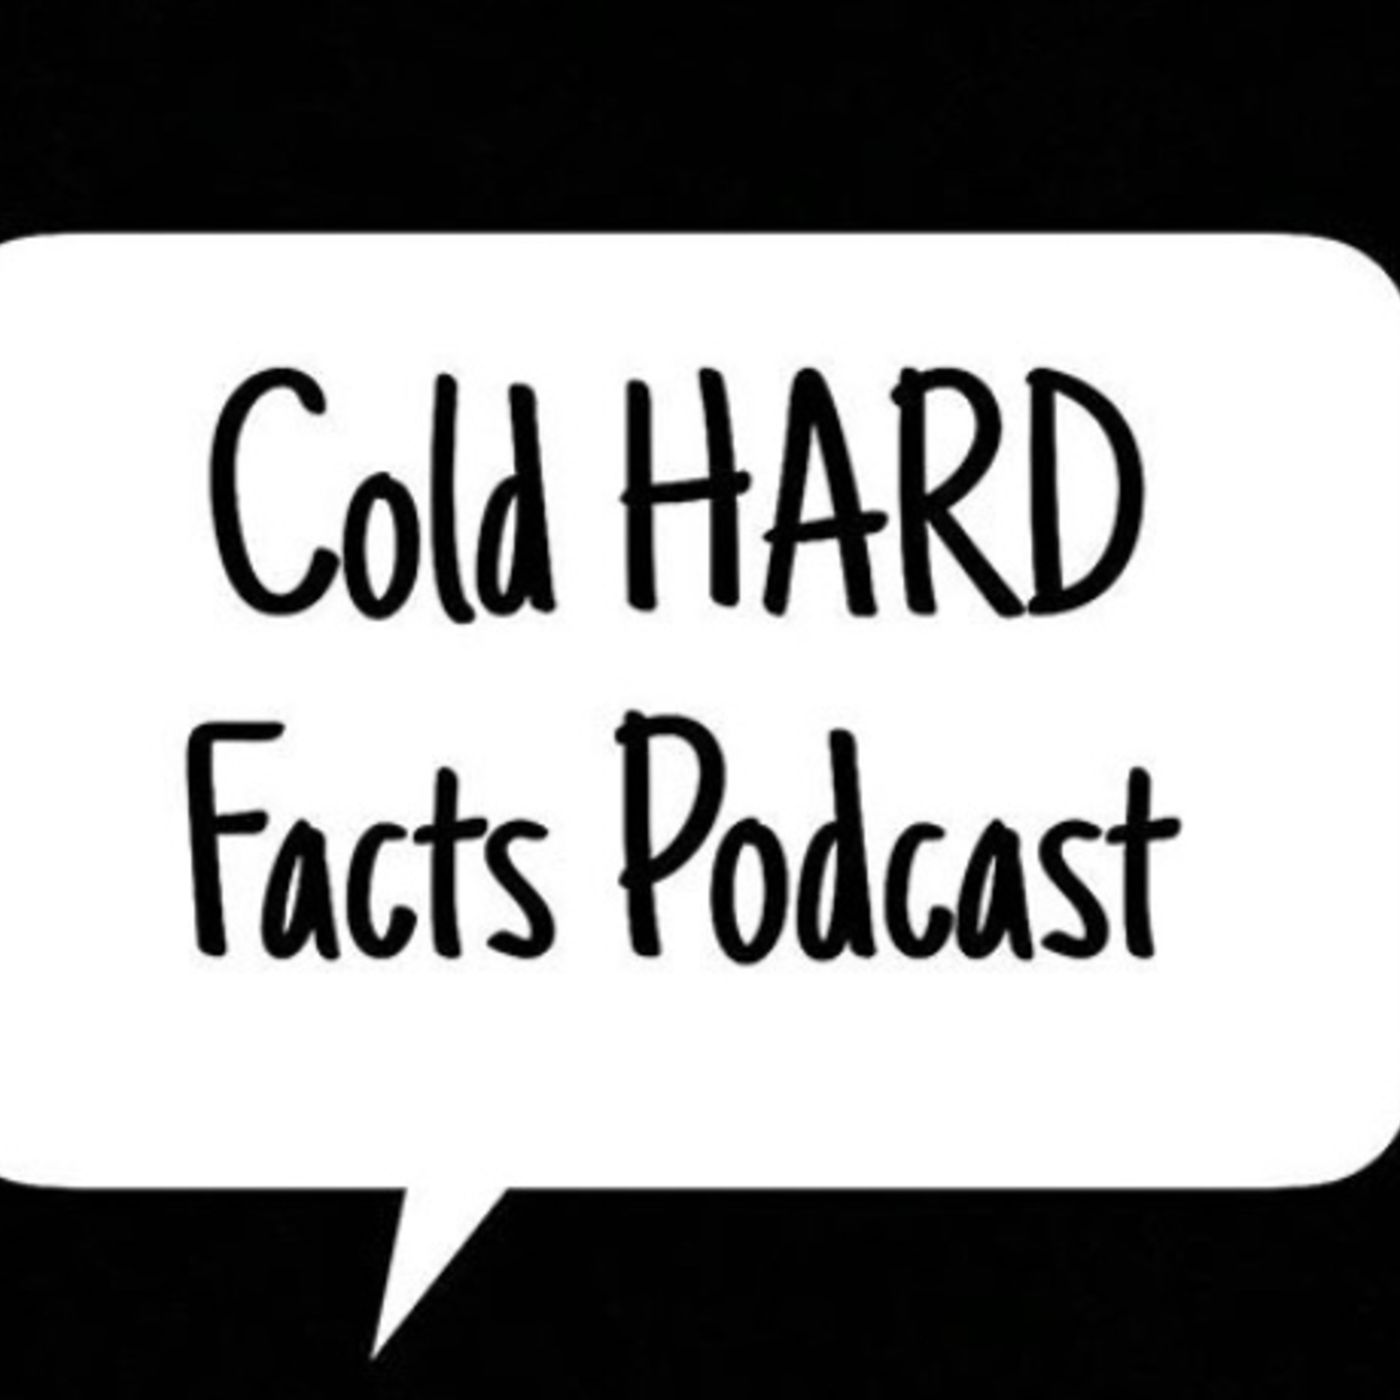 Cold HARD Facts Podcast’s show